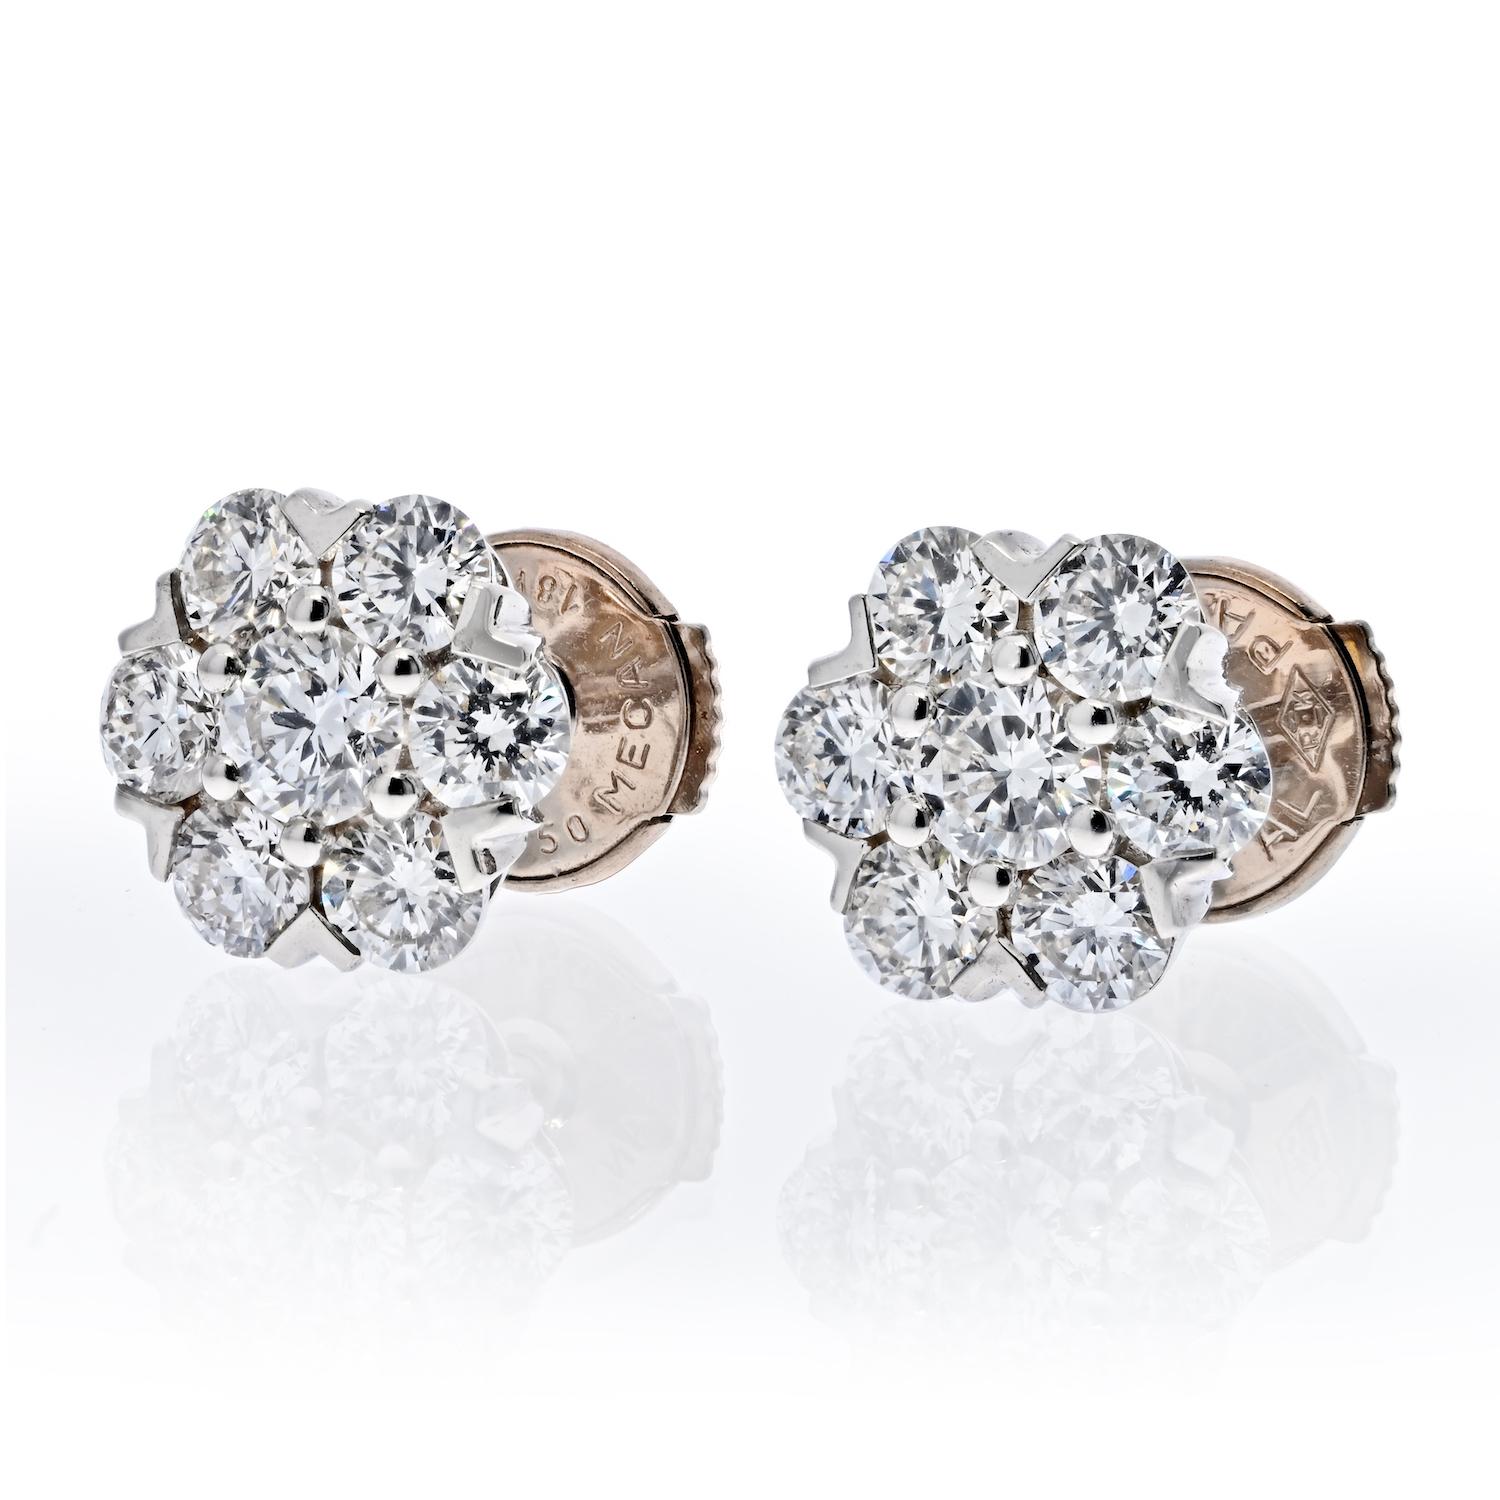 Van Cleef & Arpels 18K White Gold Fleurette Earstuds. 
18K White Gold. 
14 Round Diamonds 
Approx. 1.00cttw 
Width: 8mm 
Quality: DEF IF VVS
Studs with pushbacks. 